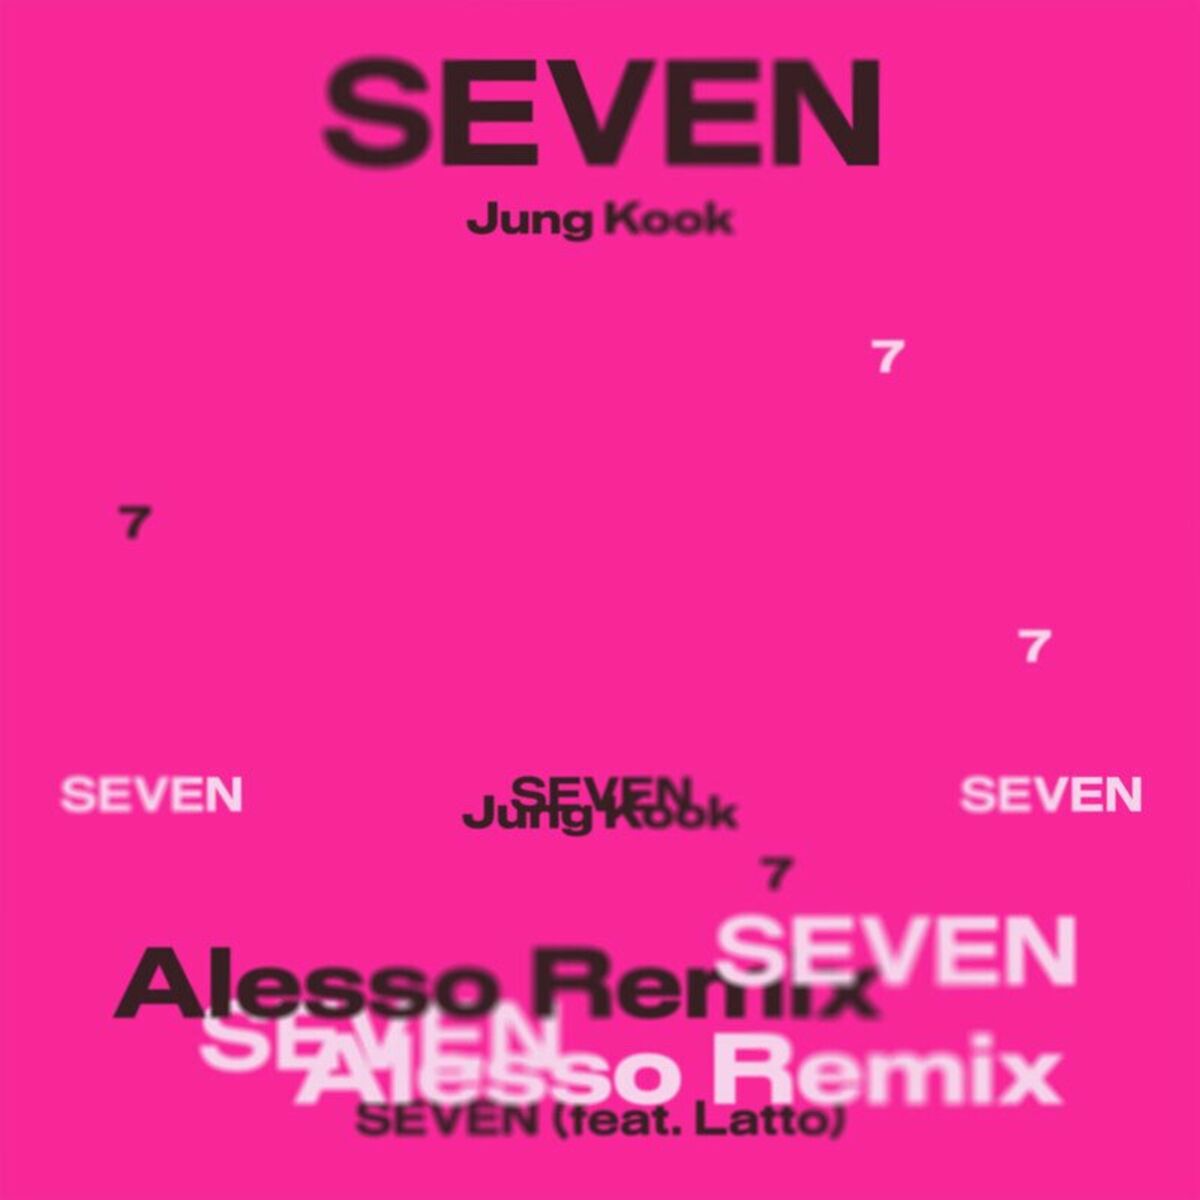 Jung Kook – Seven (feat. Latto) (Alesso Remix) – EP